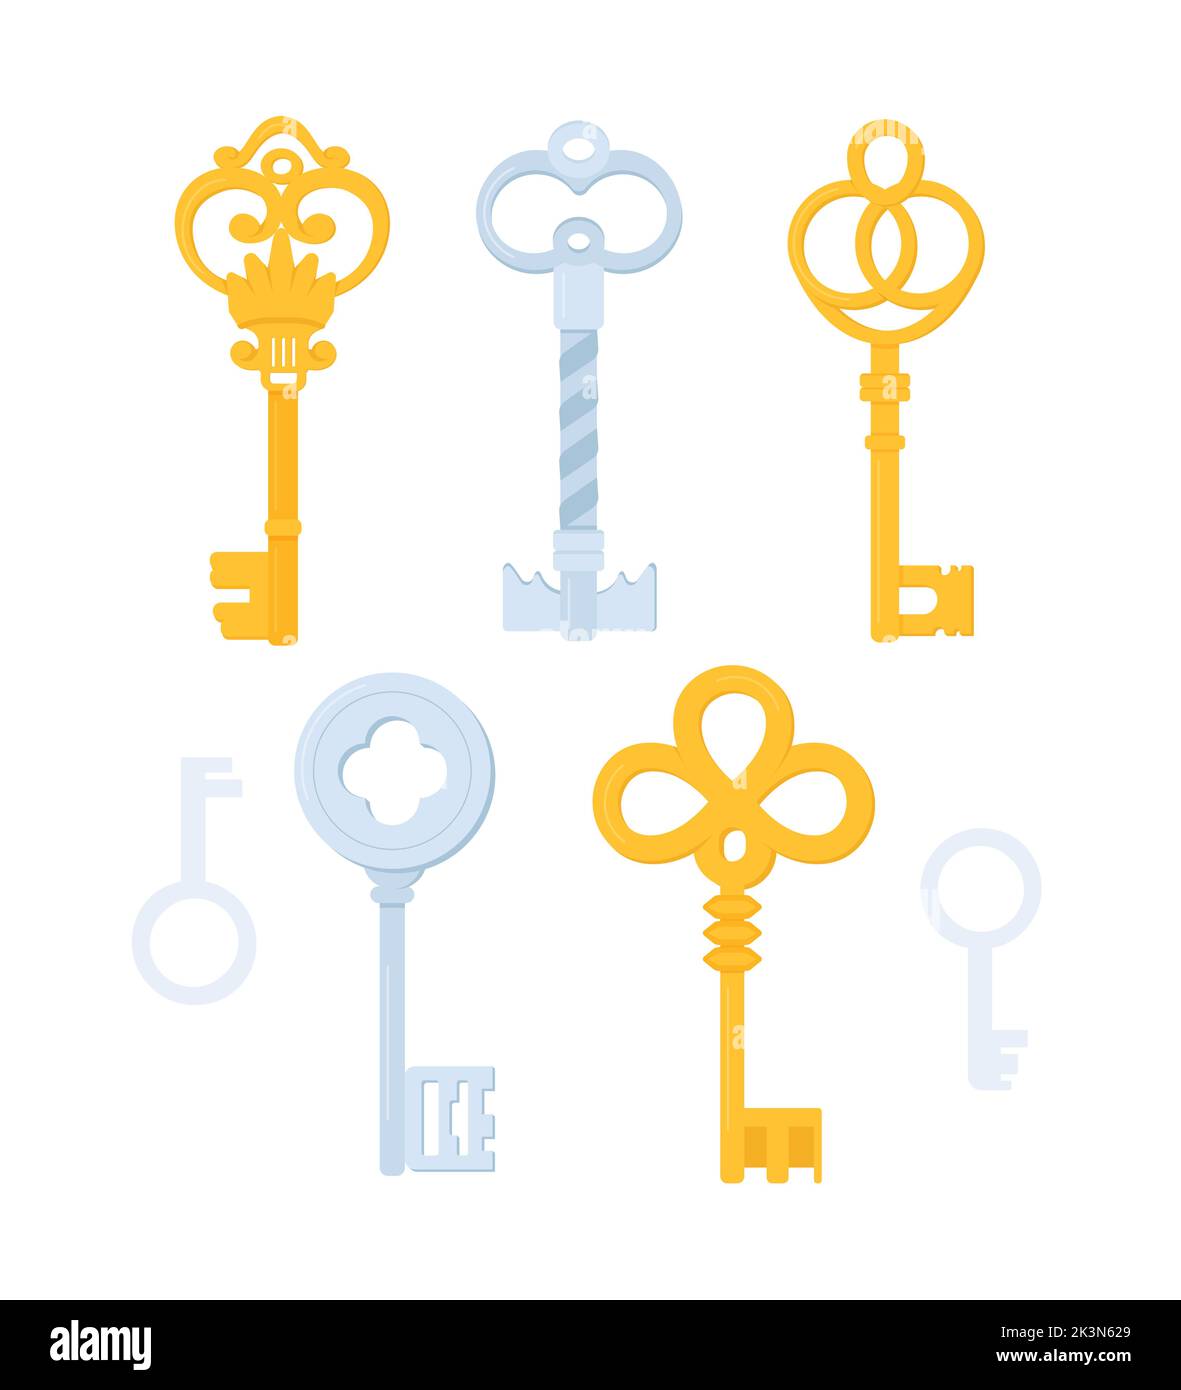 Medieval golden and silver keys - flat design style icons set Stock Vector